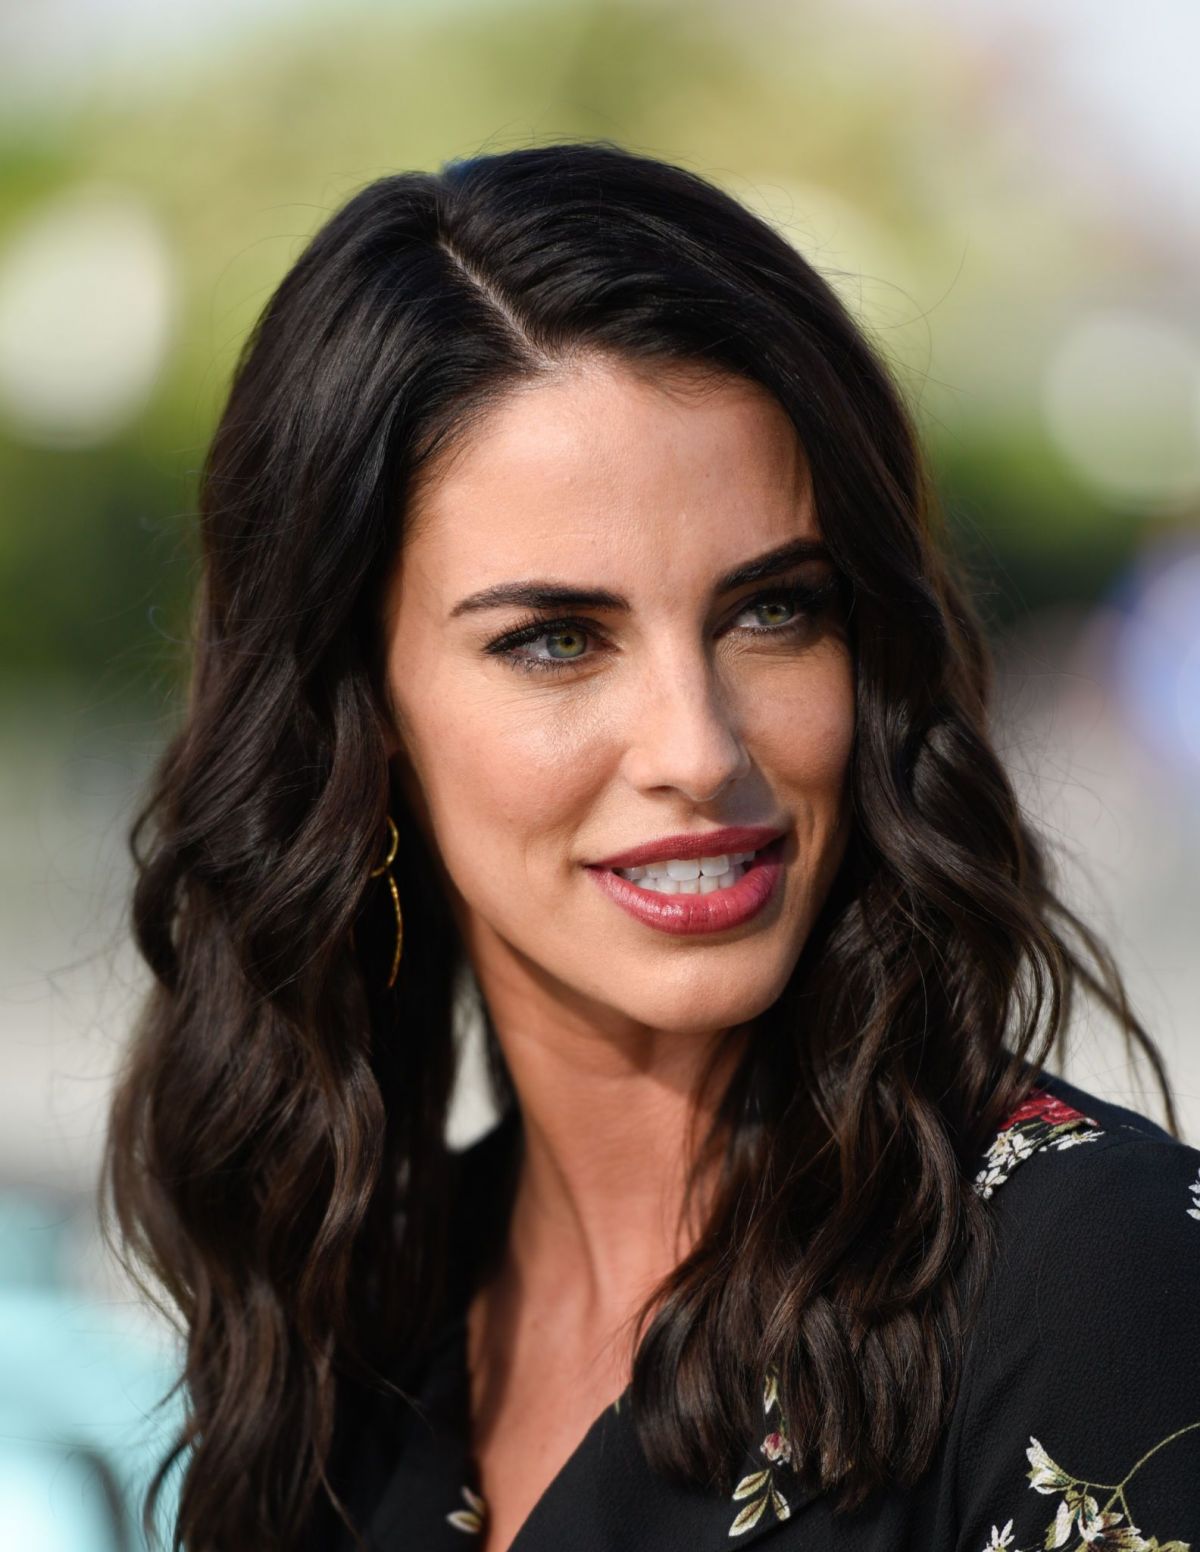 30 Jessica Lowndes Pictures Richi Gallery Checkout canadian actress jessica lowndes height, age, weight, boyfriend, husband, family, parents, body measurements, net worth, hair color, some jessica lowndes is a canadian actress, singer, and songwriter, and she was born in vancouver, canada on november 8, 1988. 30 jessica lowndes pictures richi